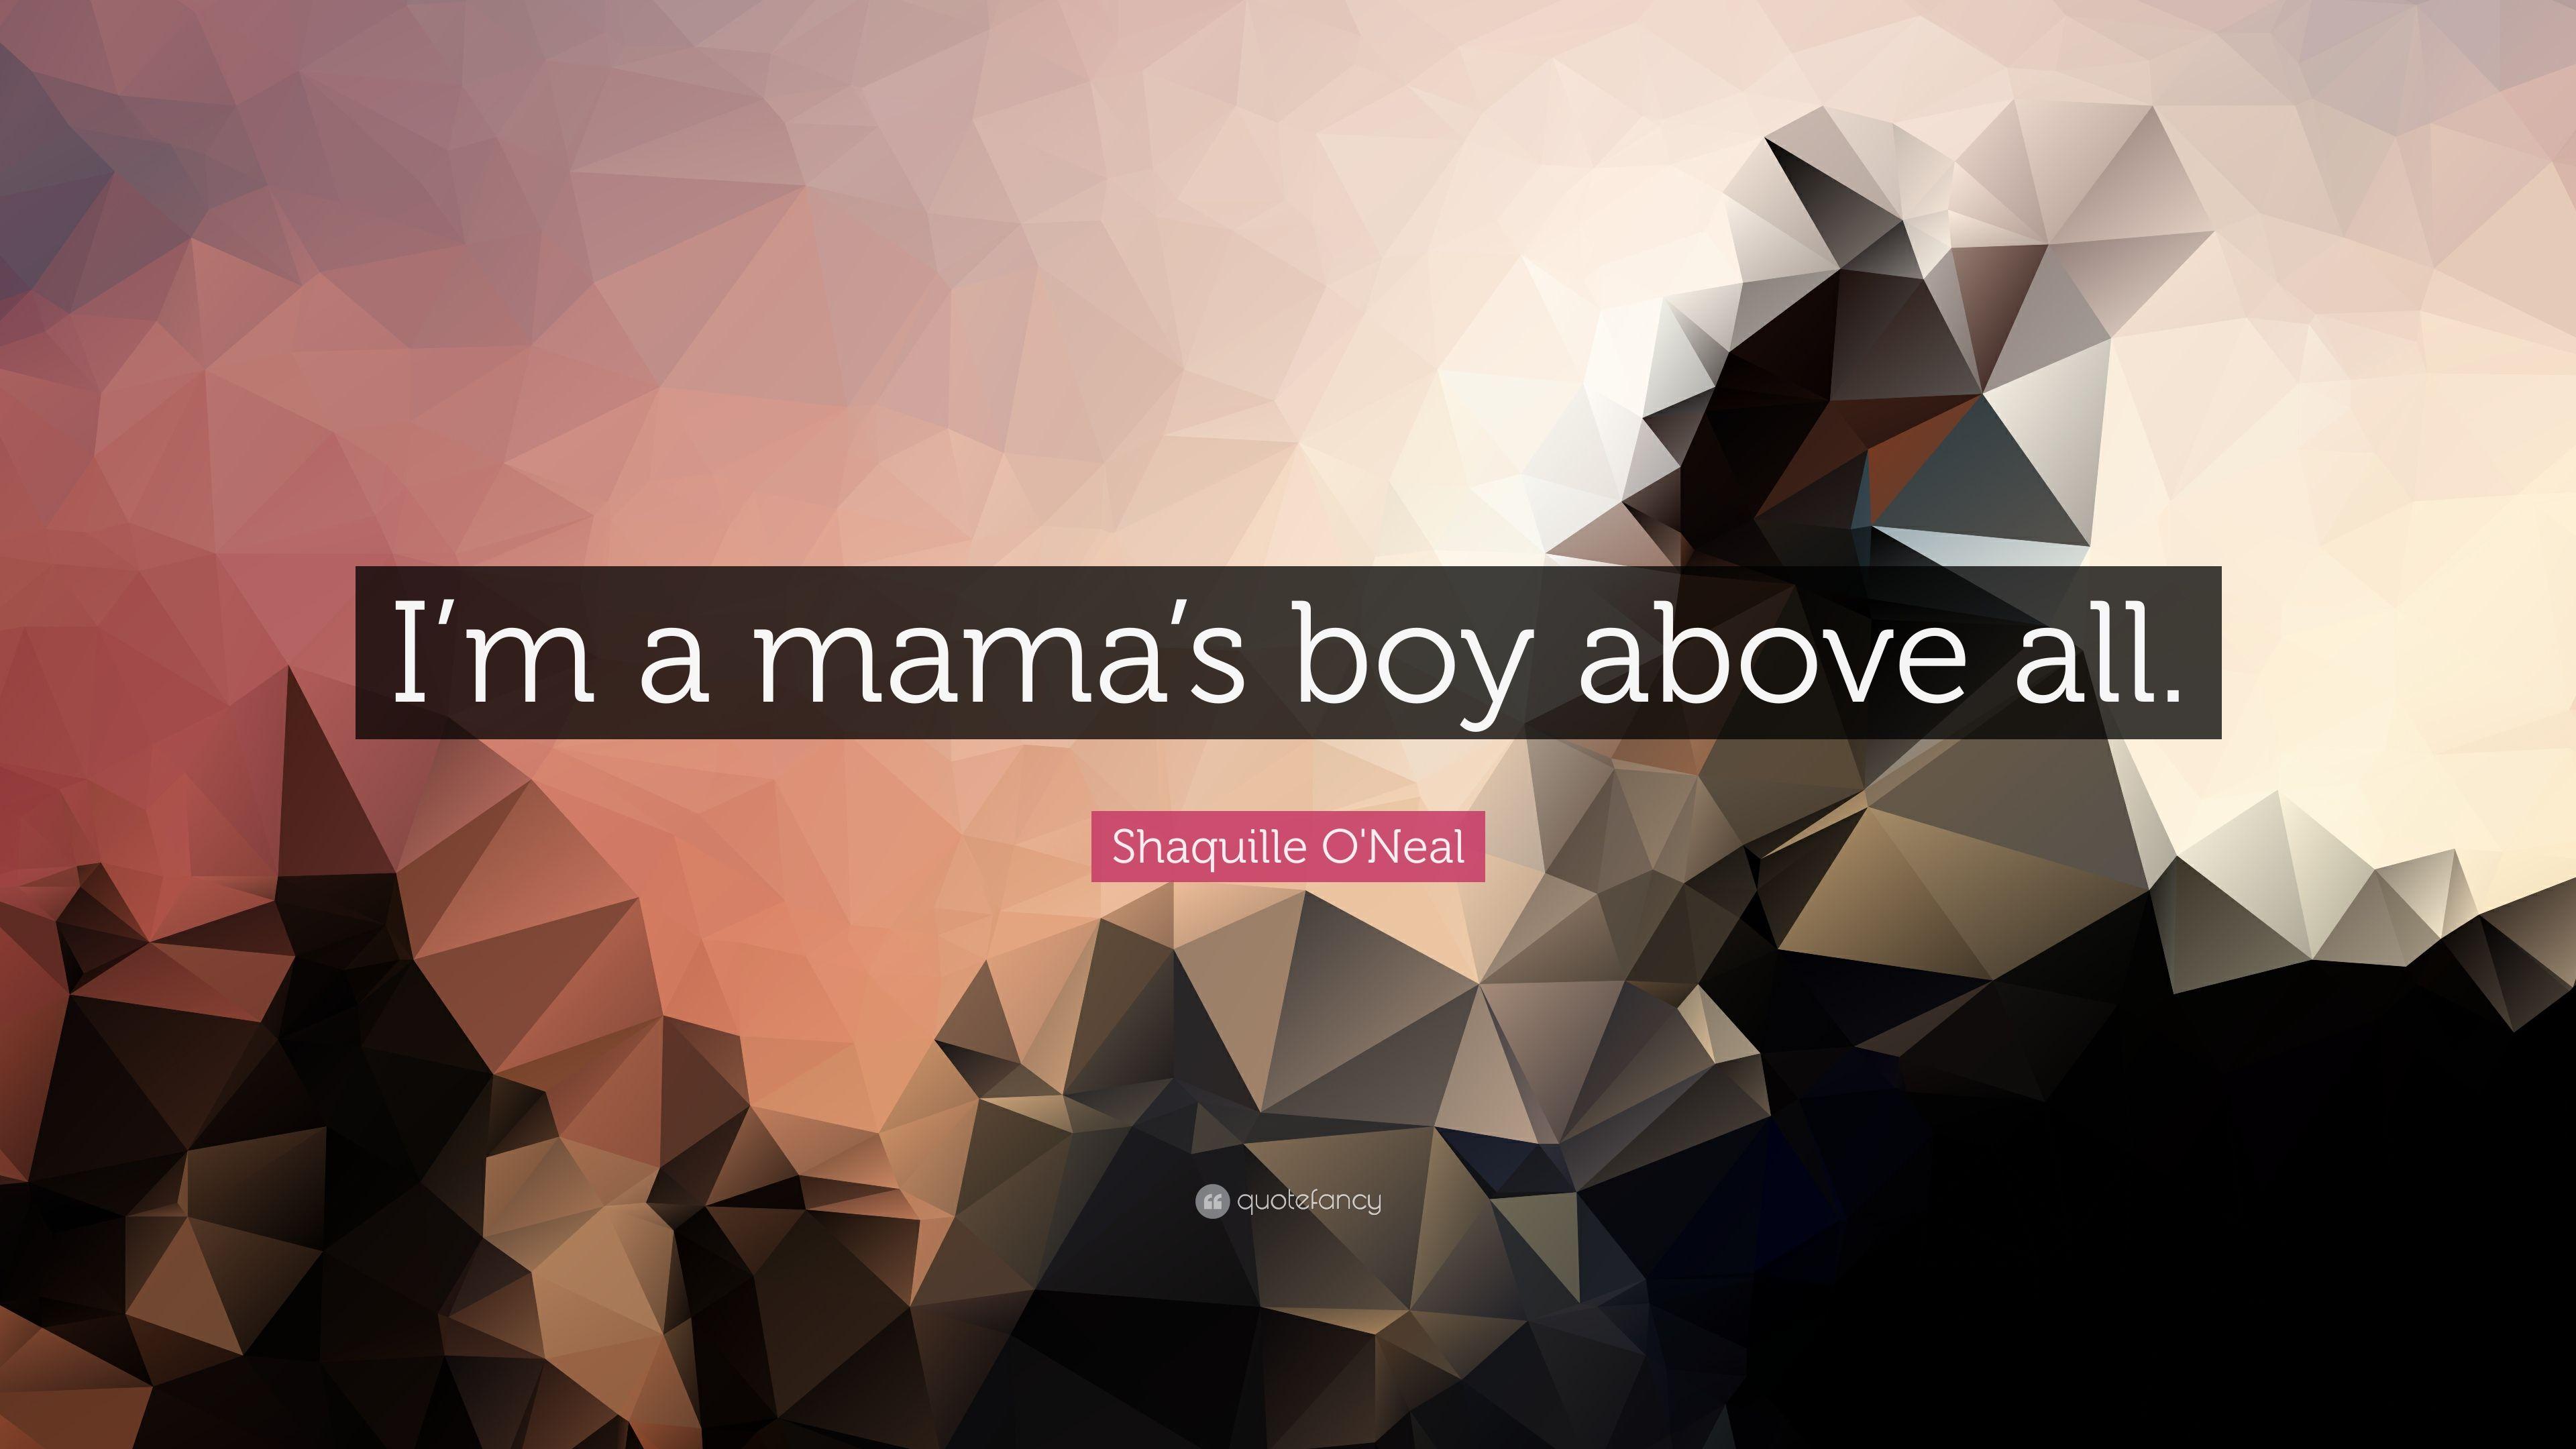 Shaquille O'Neal Quote: “I'm a mama's boy above all.” 7